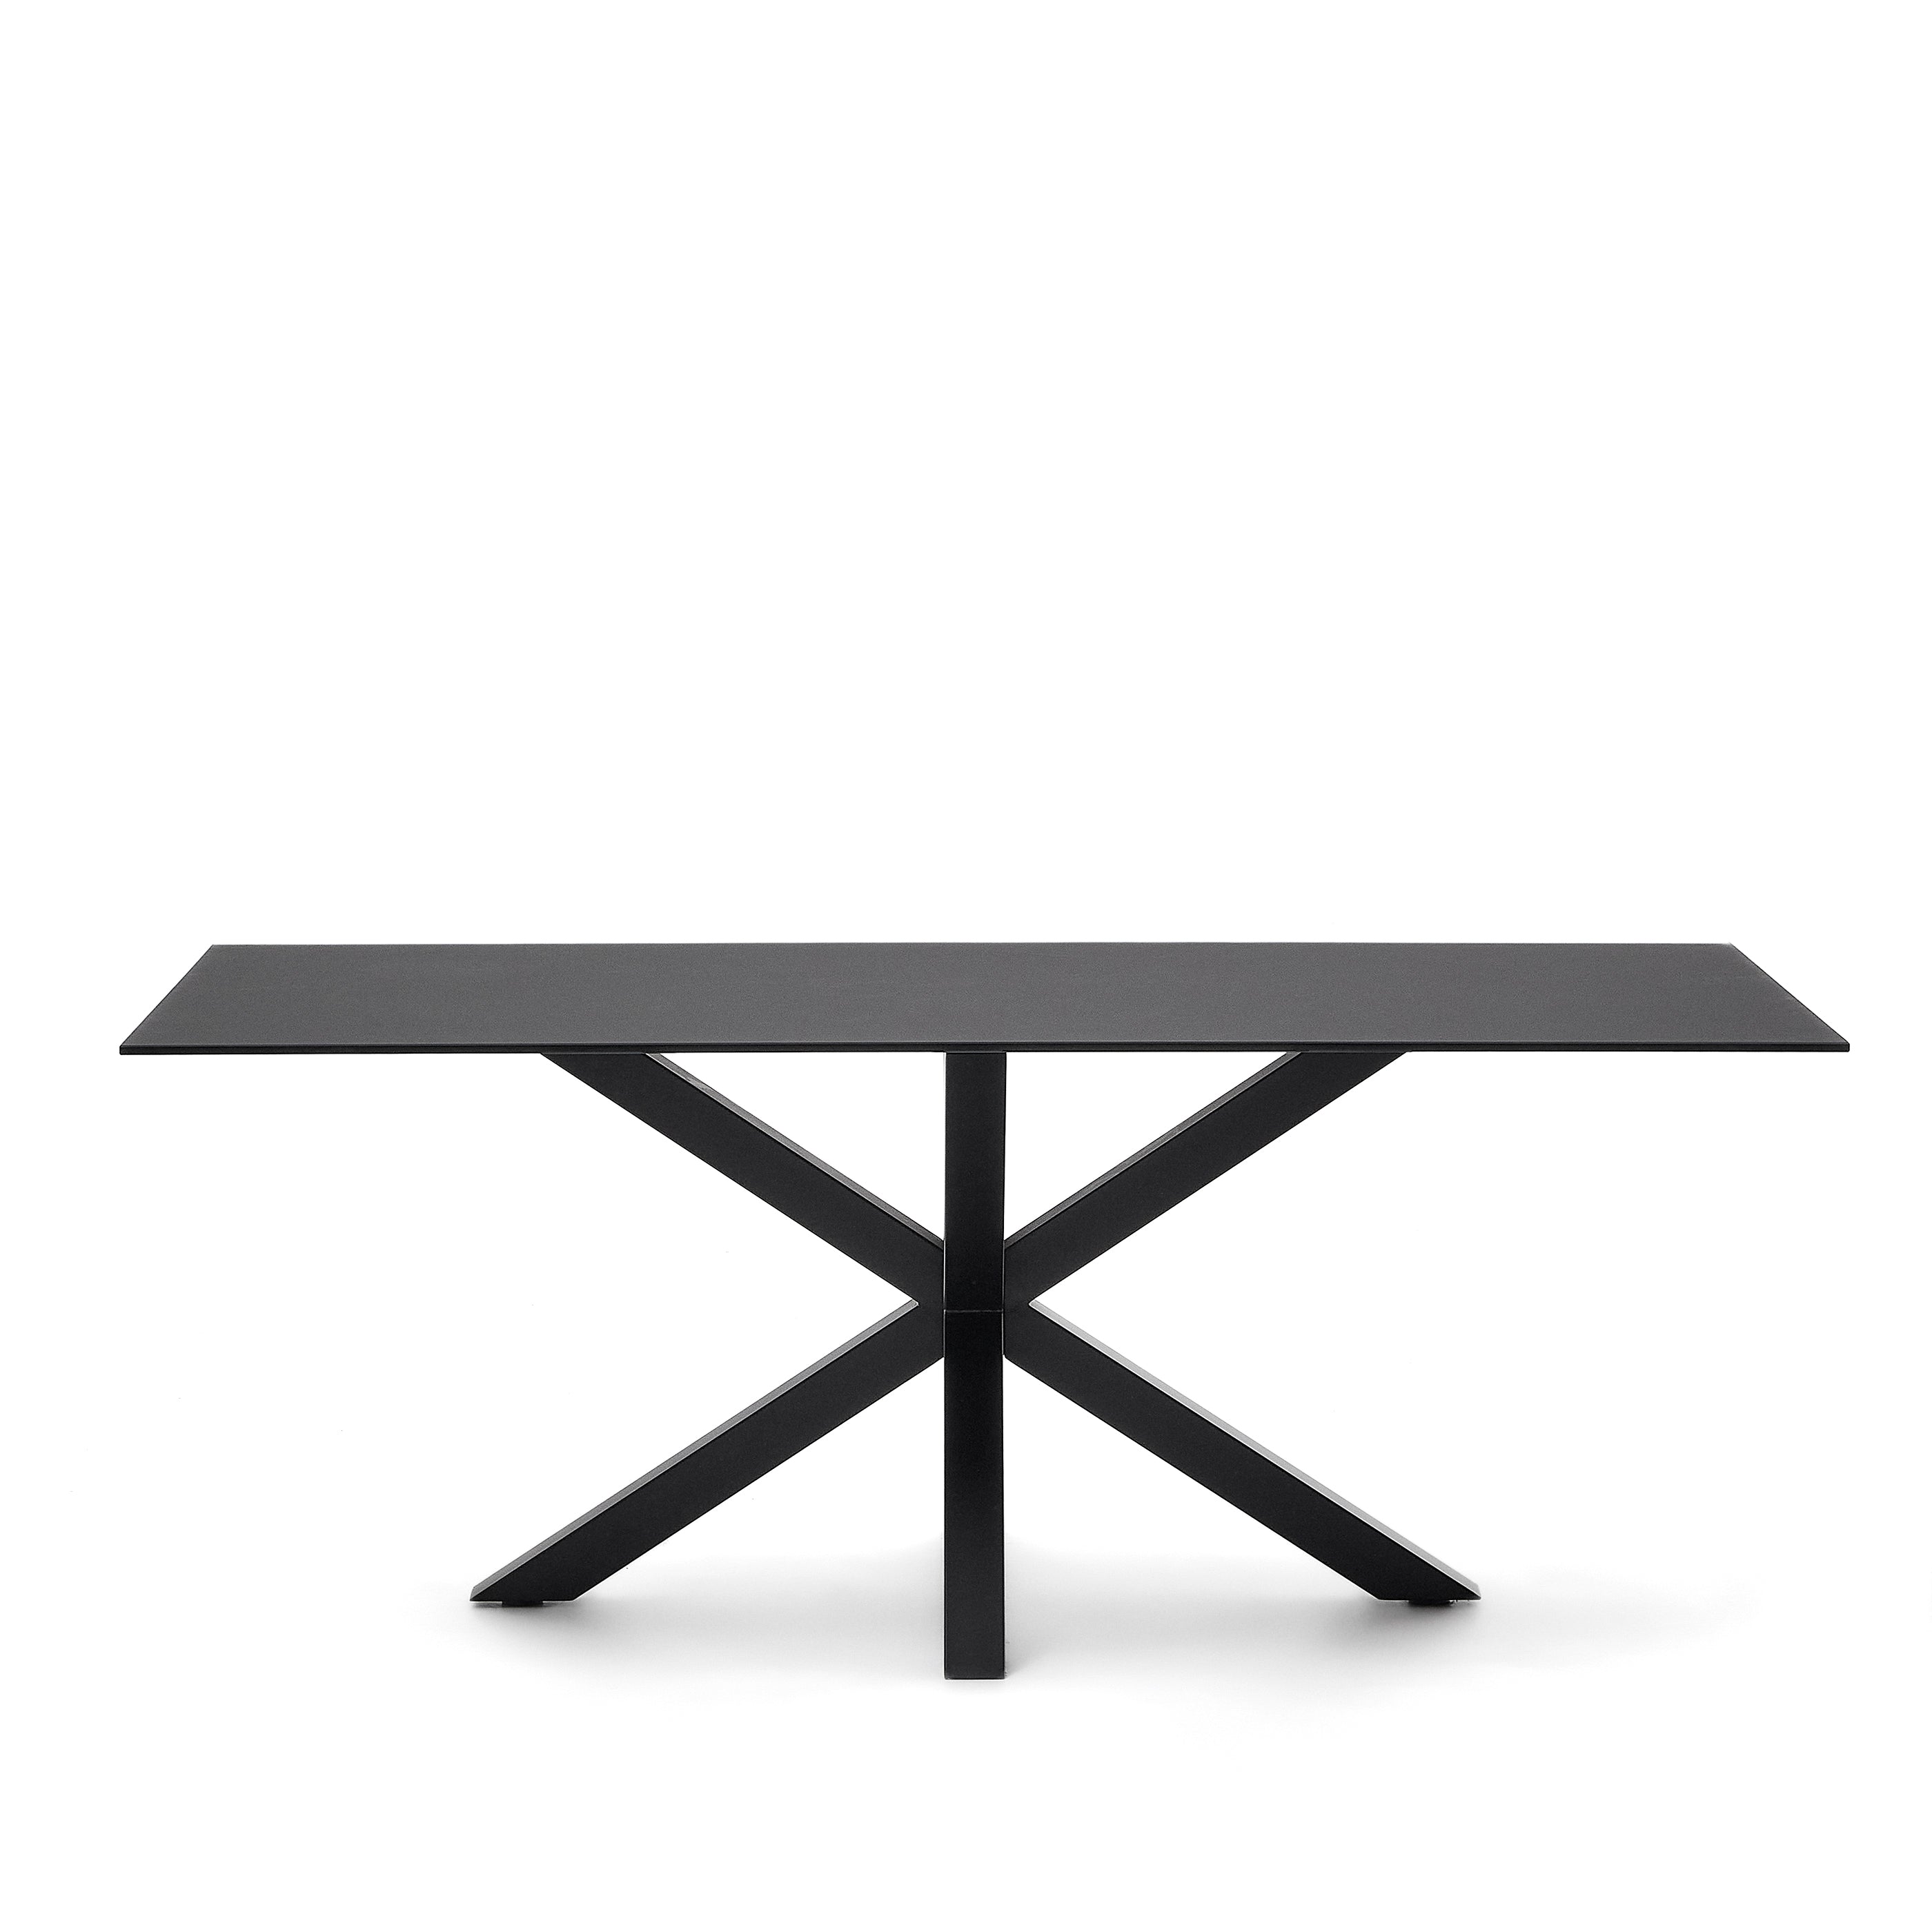 Argo table with black glass and black steel legs 200 x 100 cm